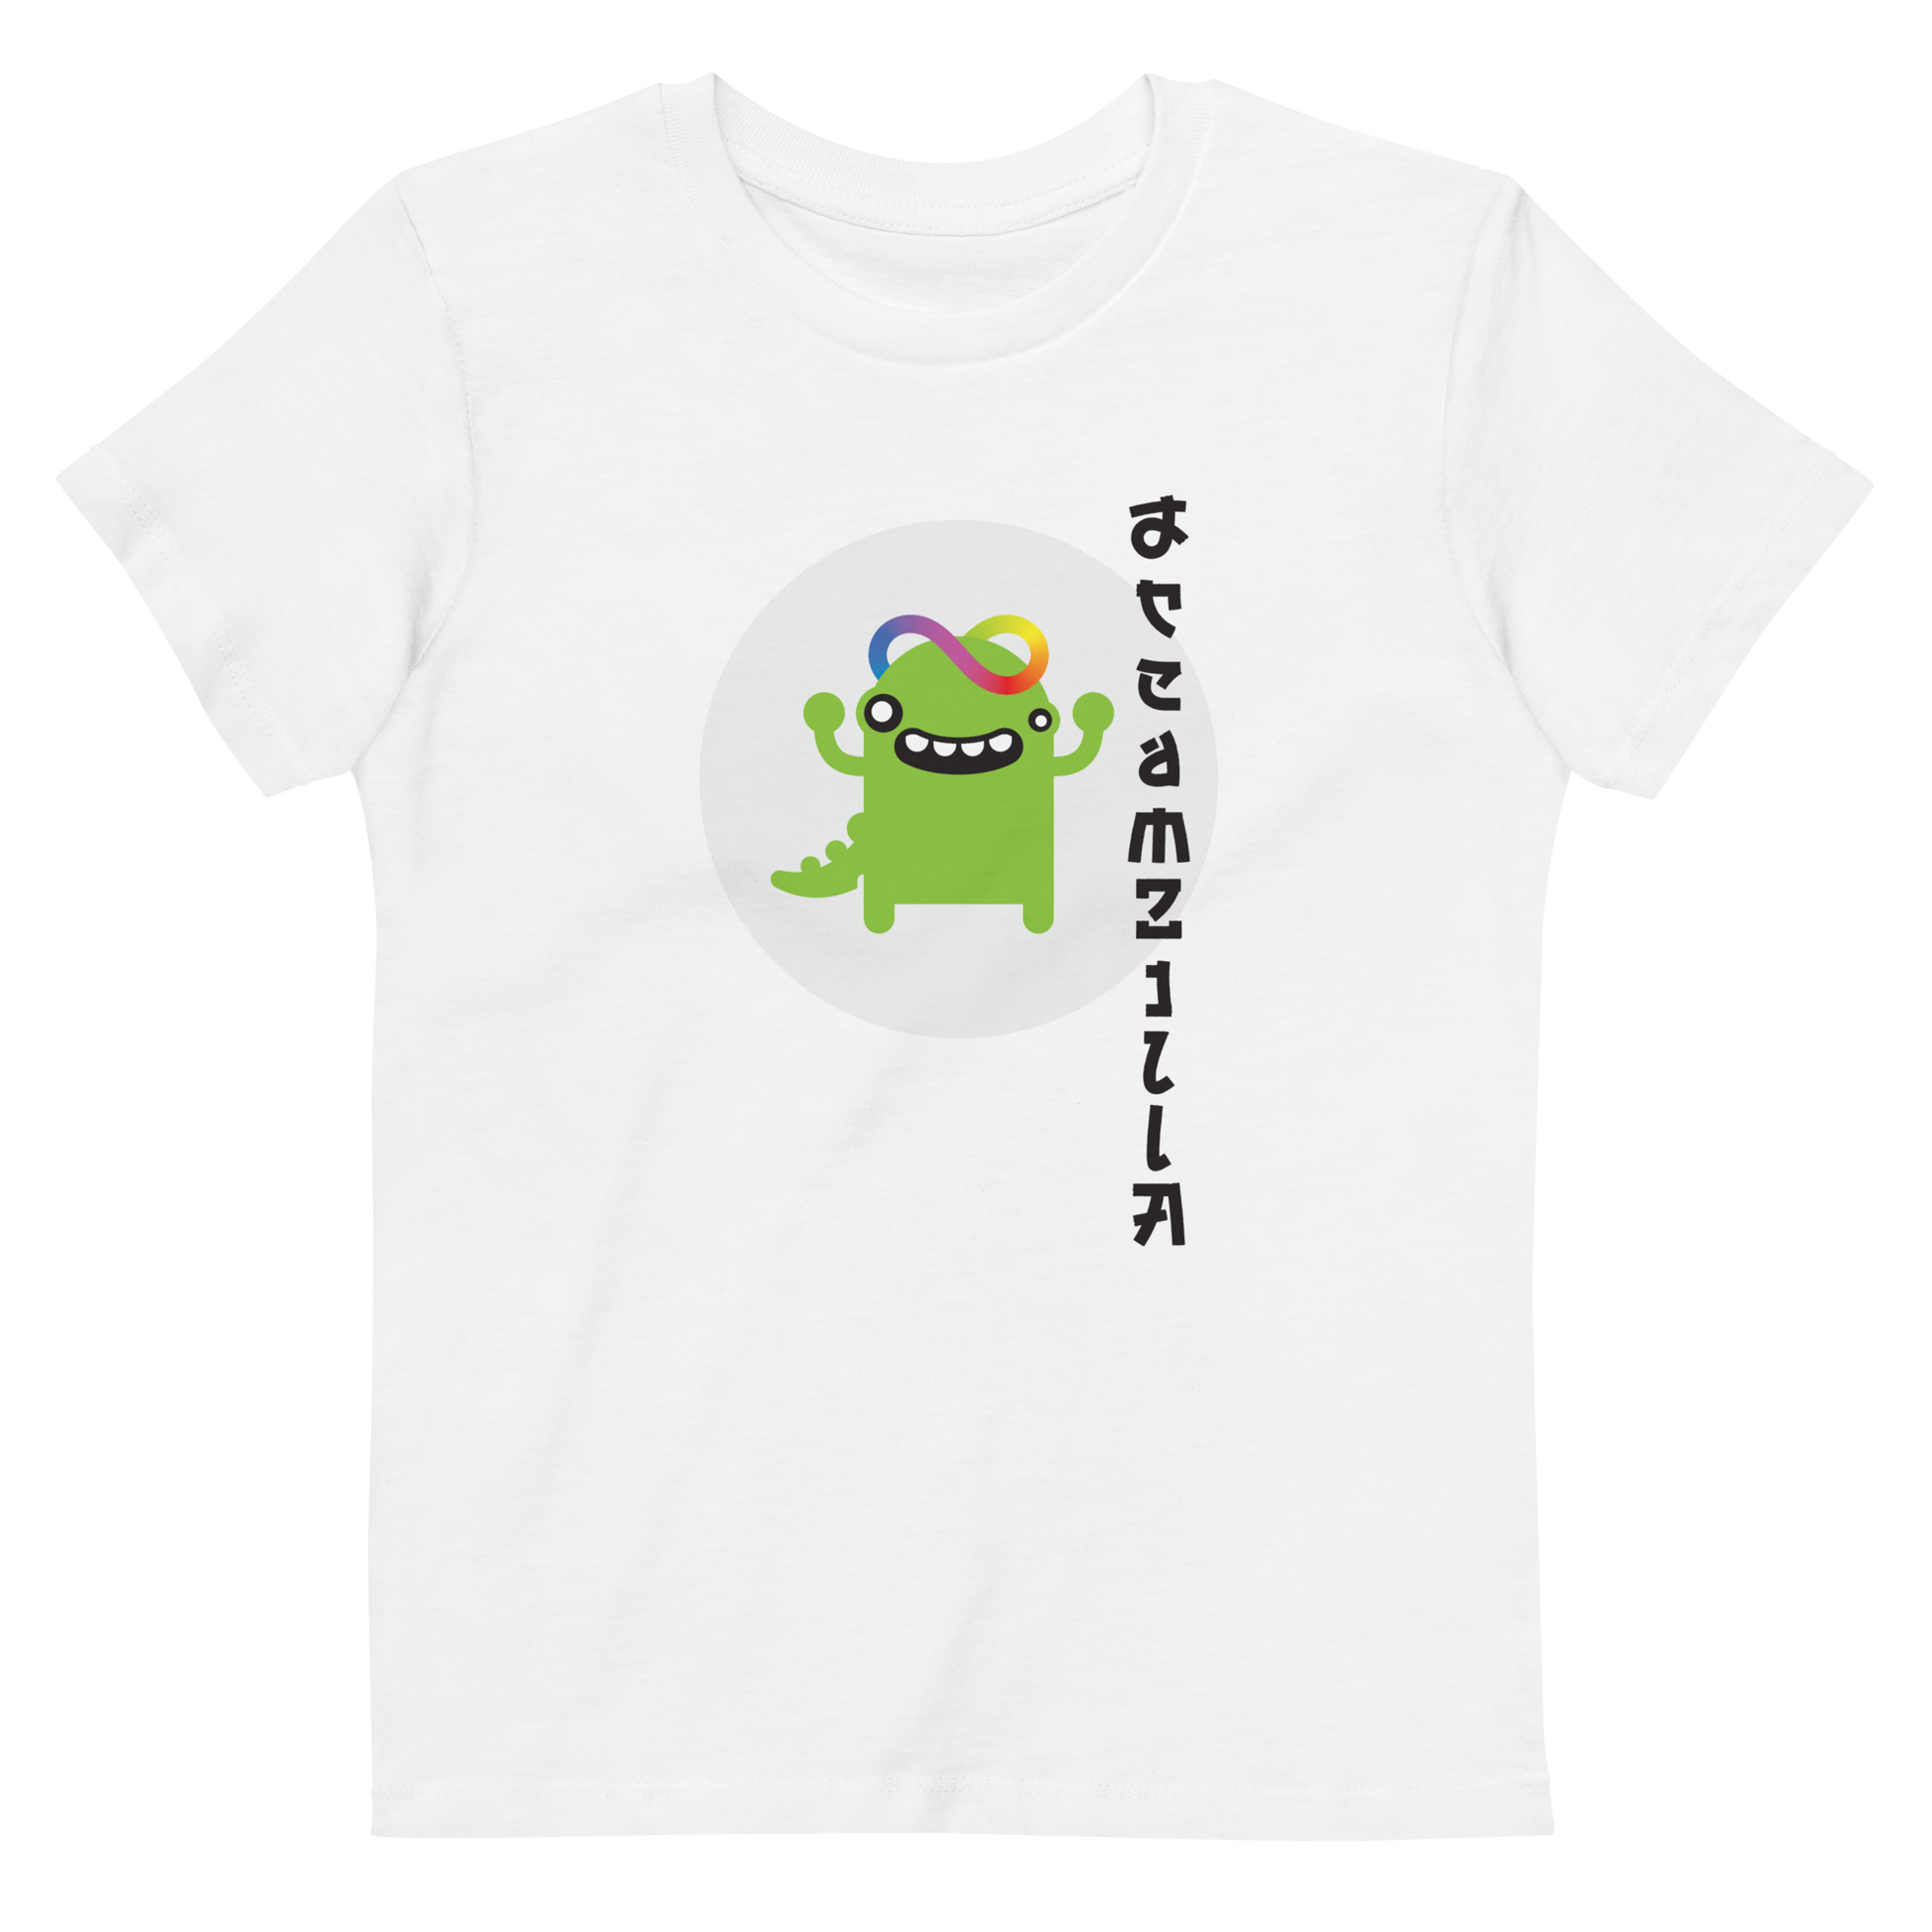 Baby Zilla Kids Eco-Friendly Short Sleeve Tee in White